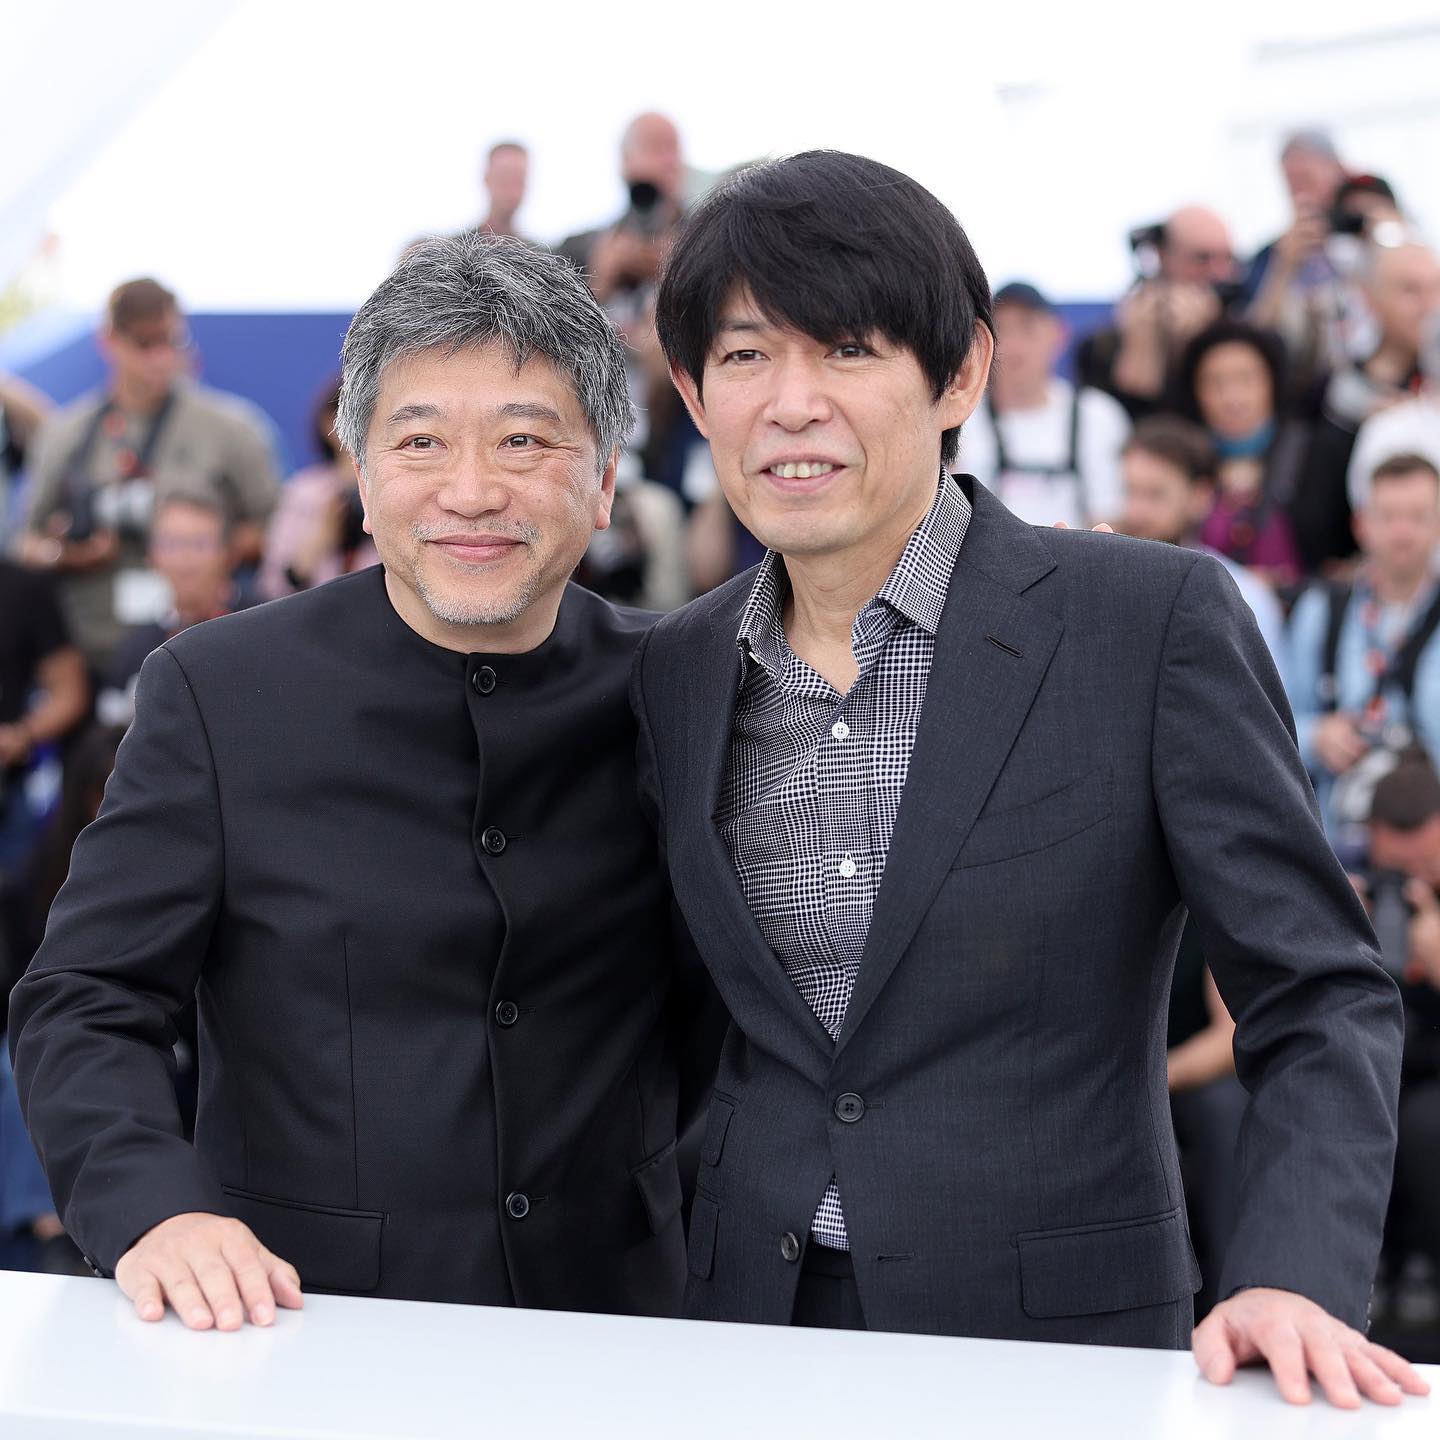 -
Celebrated filmmaker Hirokazu Kore-eda's latest feature film, 𝘒𝘢𝘪𝘣𝘶𝘵𝘴𝘶 ( #Monster), triumphed at the #CannesInternationalFilmFestival @festivaldecannes, garnering two prestigious awards! Yuji Sakamoto's exceptional screenplay was honored with the Best Screenplay award, and the film also made history by clinching Japan's first Queer Palm Award.

2023 Monster Film Committee
・・・
#KoreedaHirokazu  #YujiSakamoto  #Cannes2023 